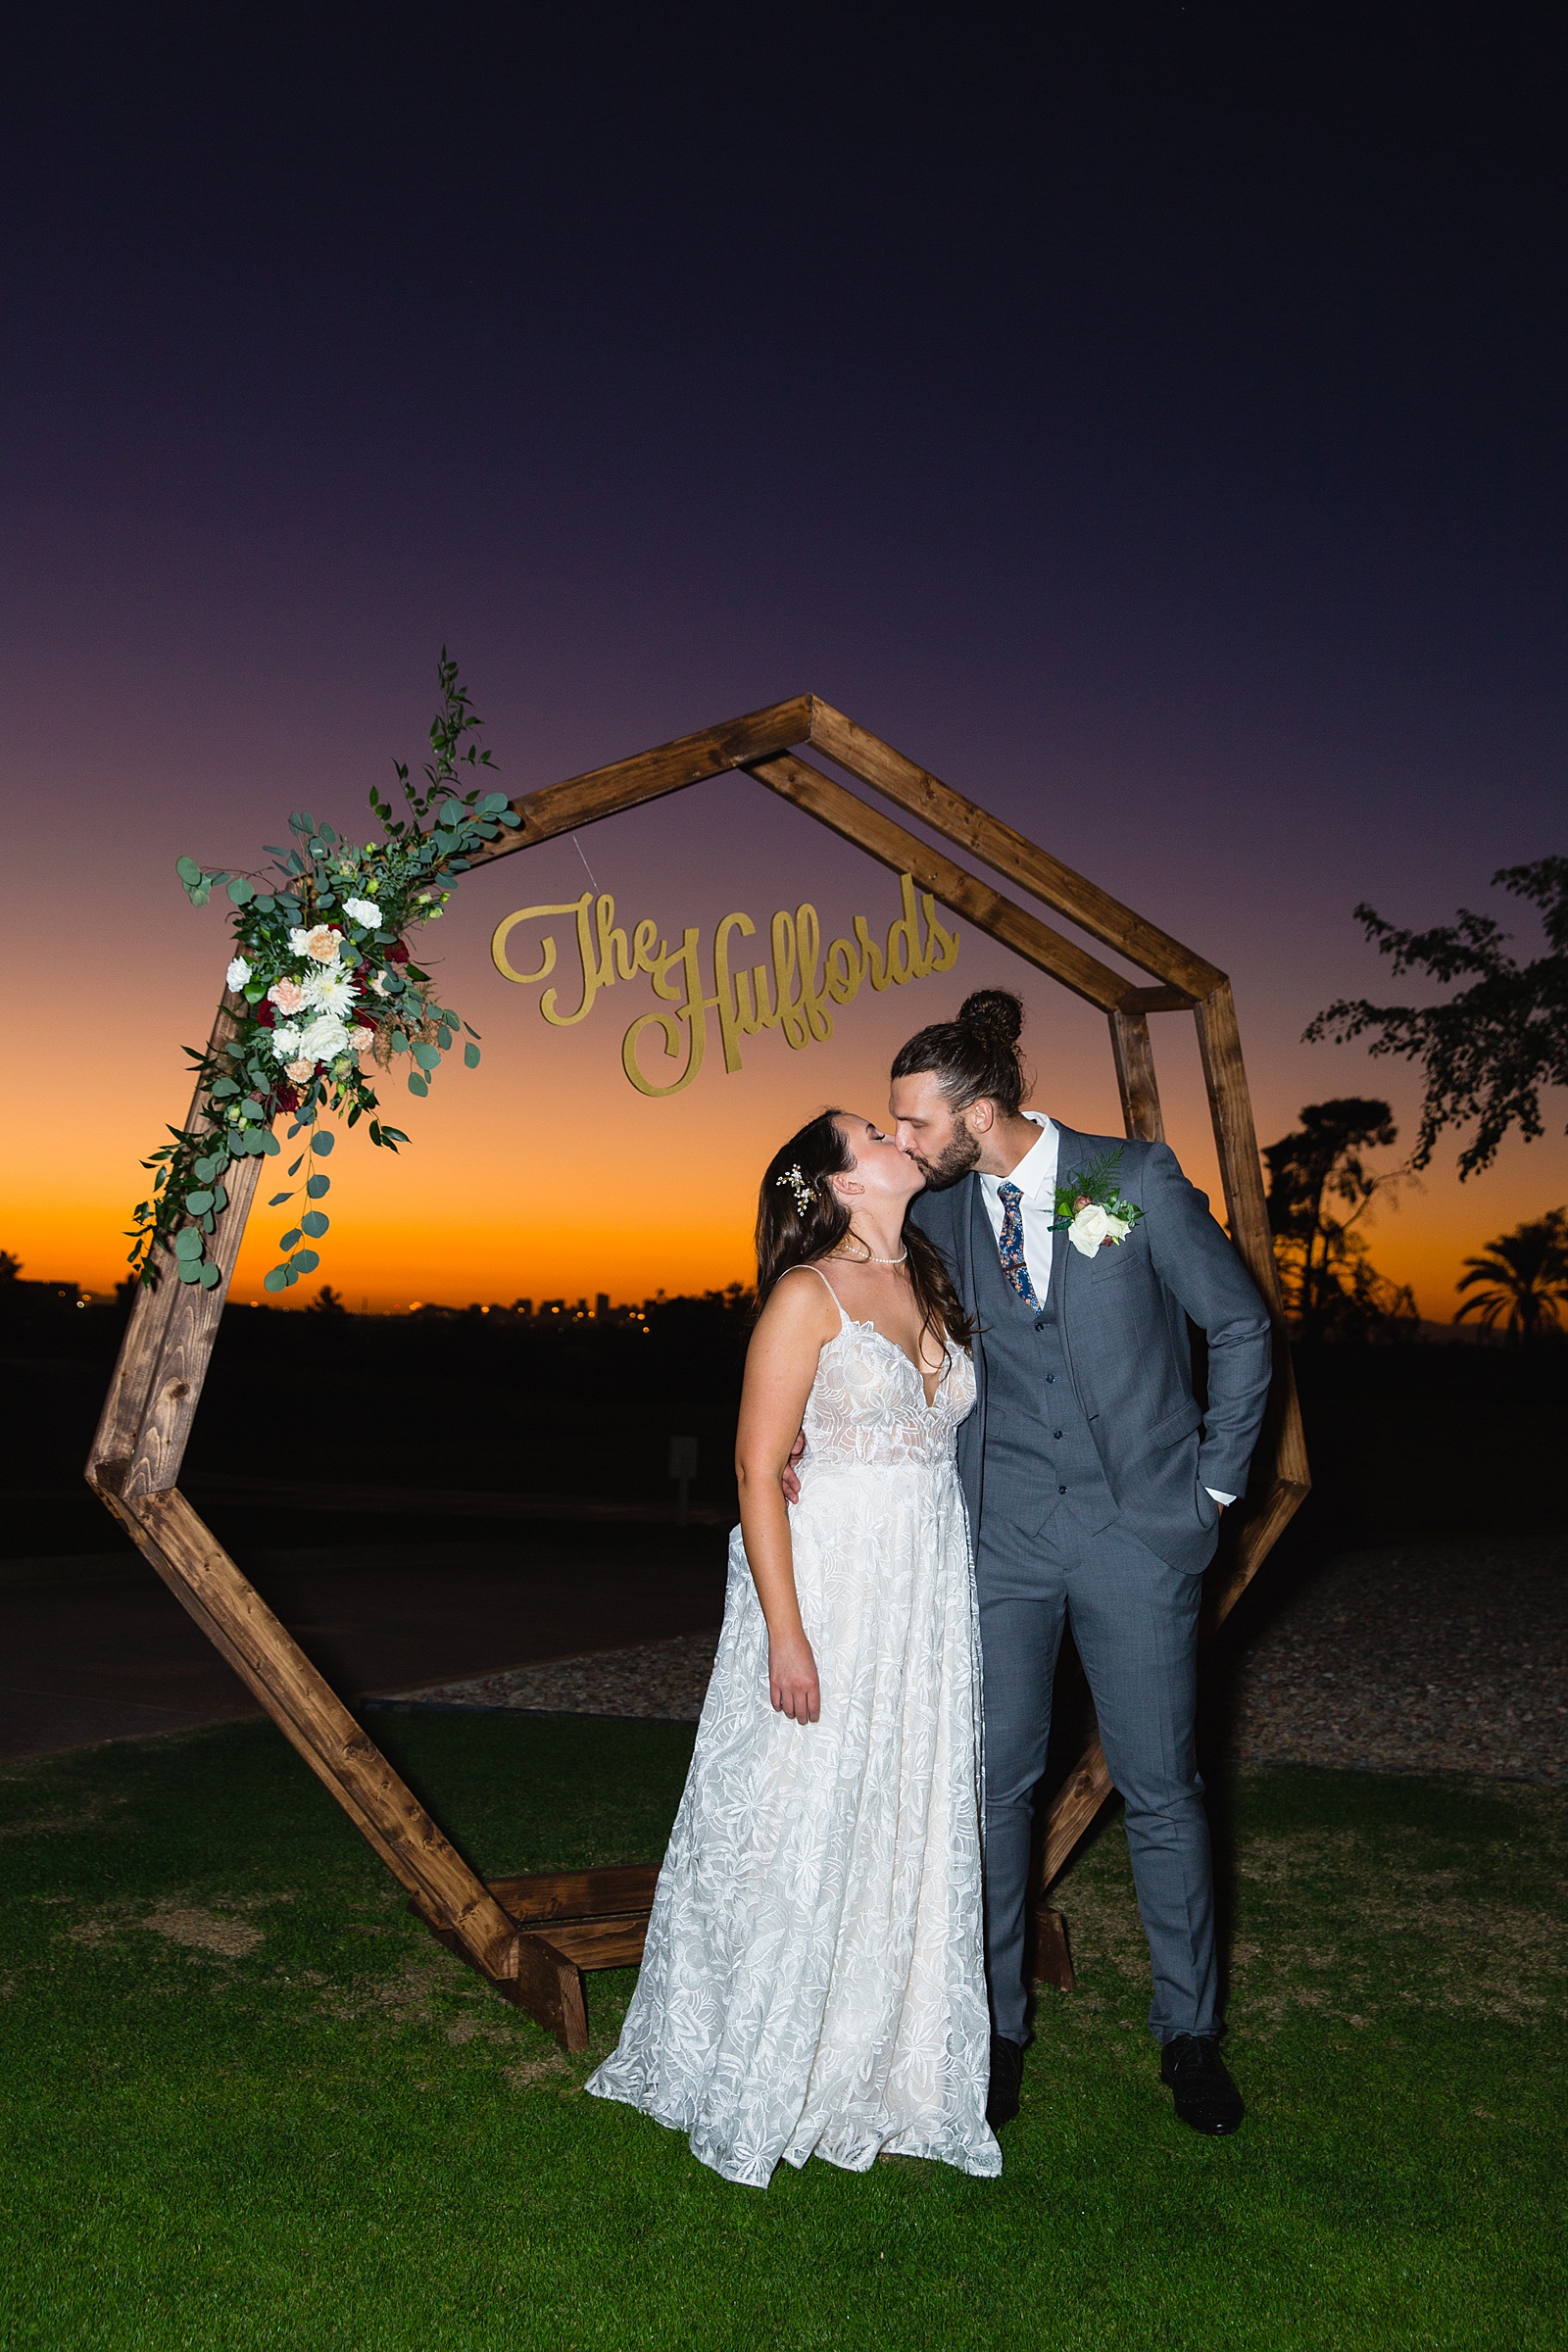 Couple share a kiss in front of their custom photo booth backdrop as the sun sets by Arizona wedding photographers PMA Photography.